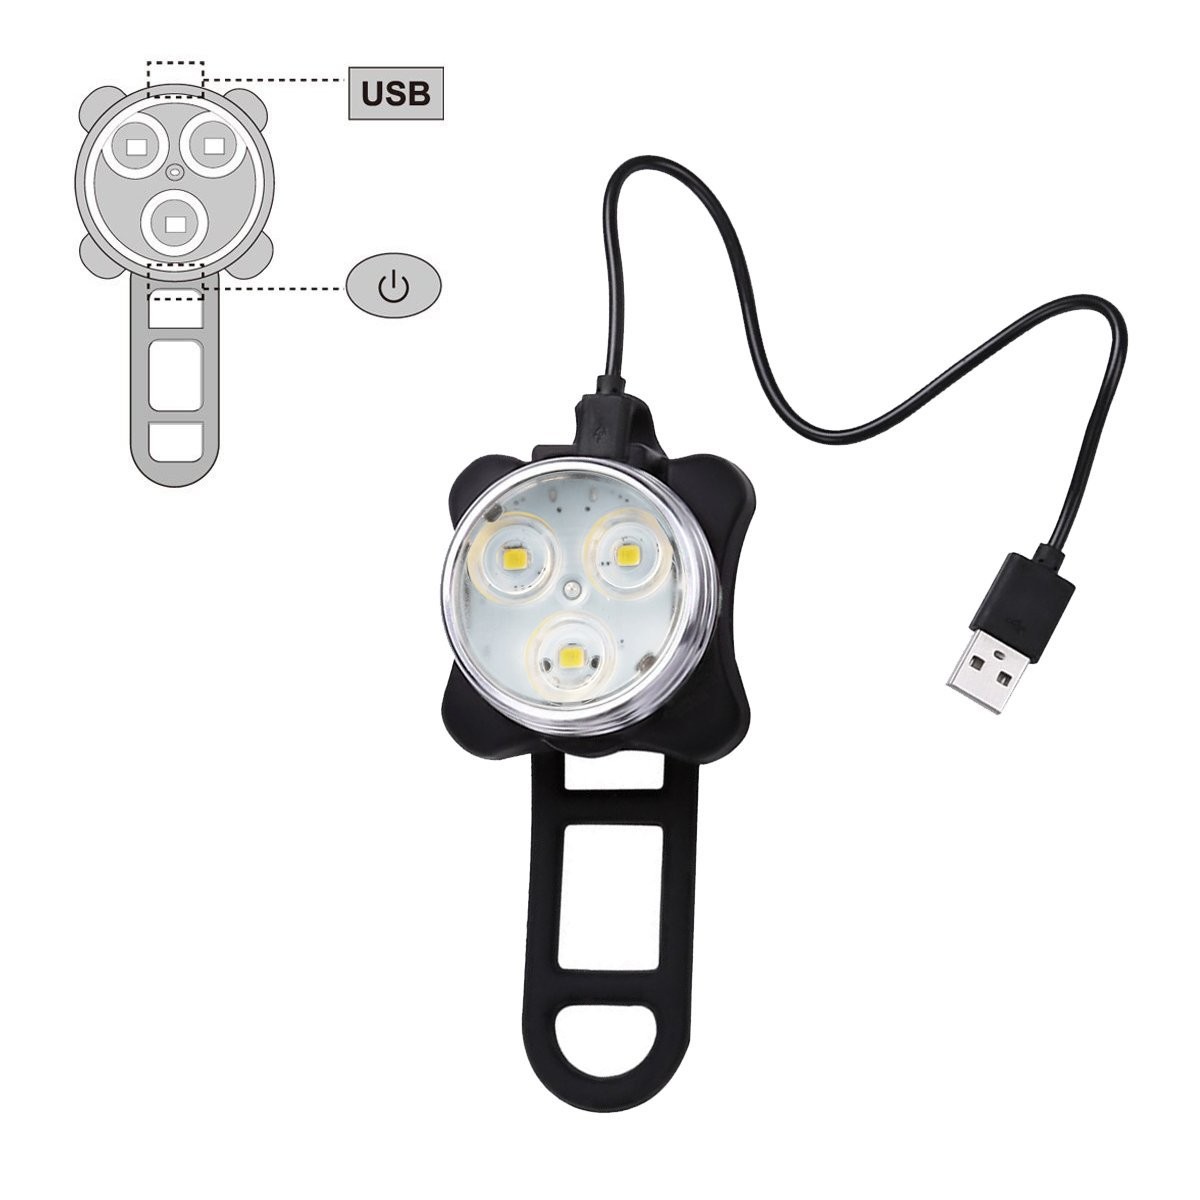 2pcs in one package Recharegable bicycle light